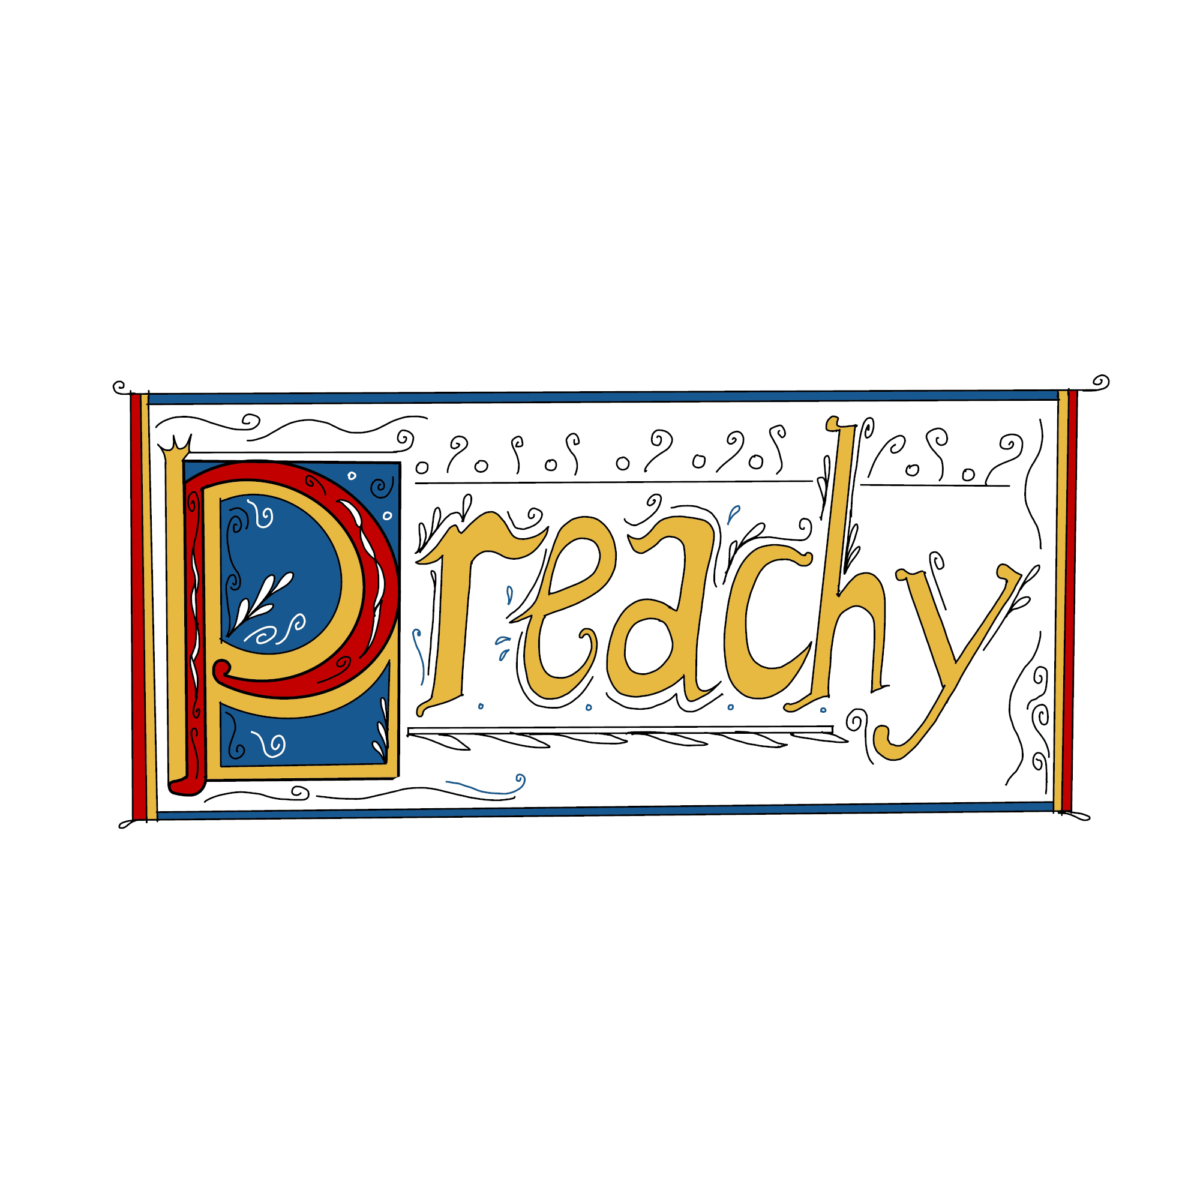 Preachy -- a new space to write and think critically about spirituality, religiosity, and modes of peace and introspection, from Mike Kanin and Sunny Sone.